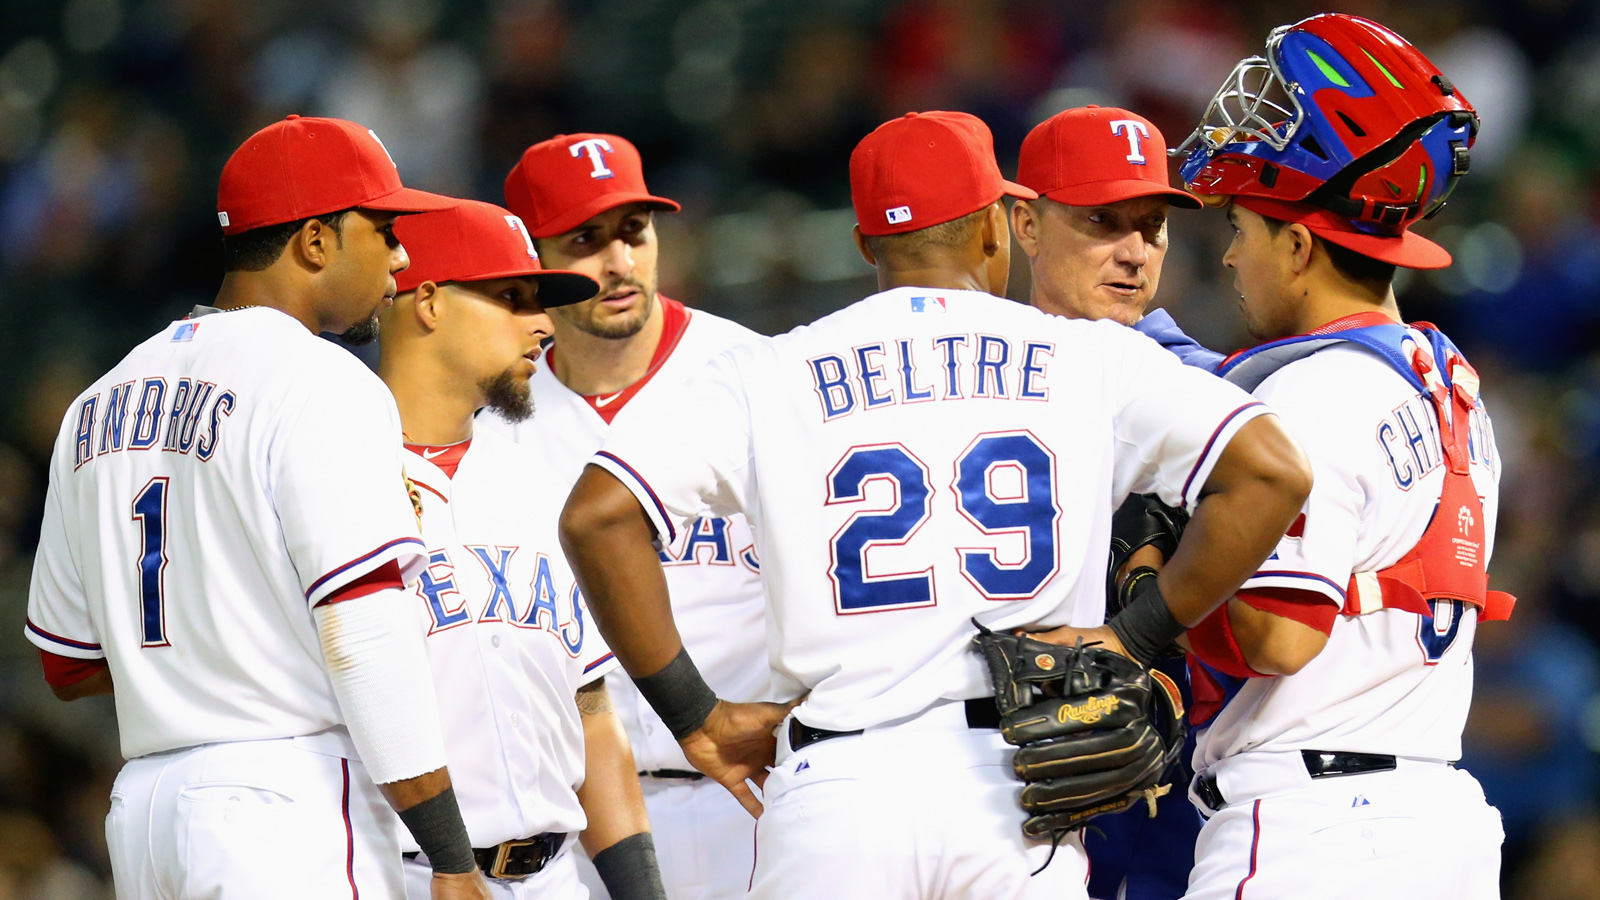 What's it going to take for Rangers to make postseason? FOX Sports